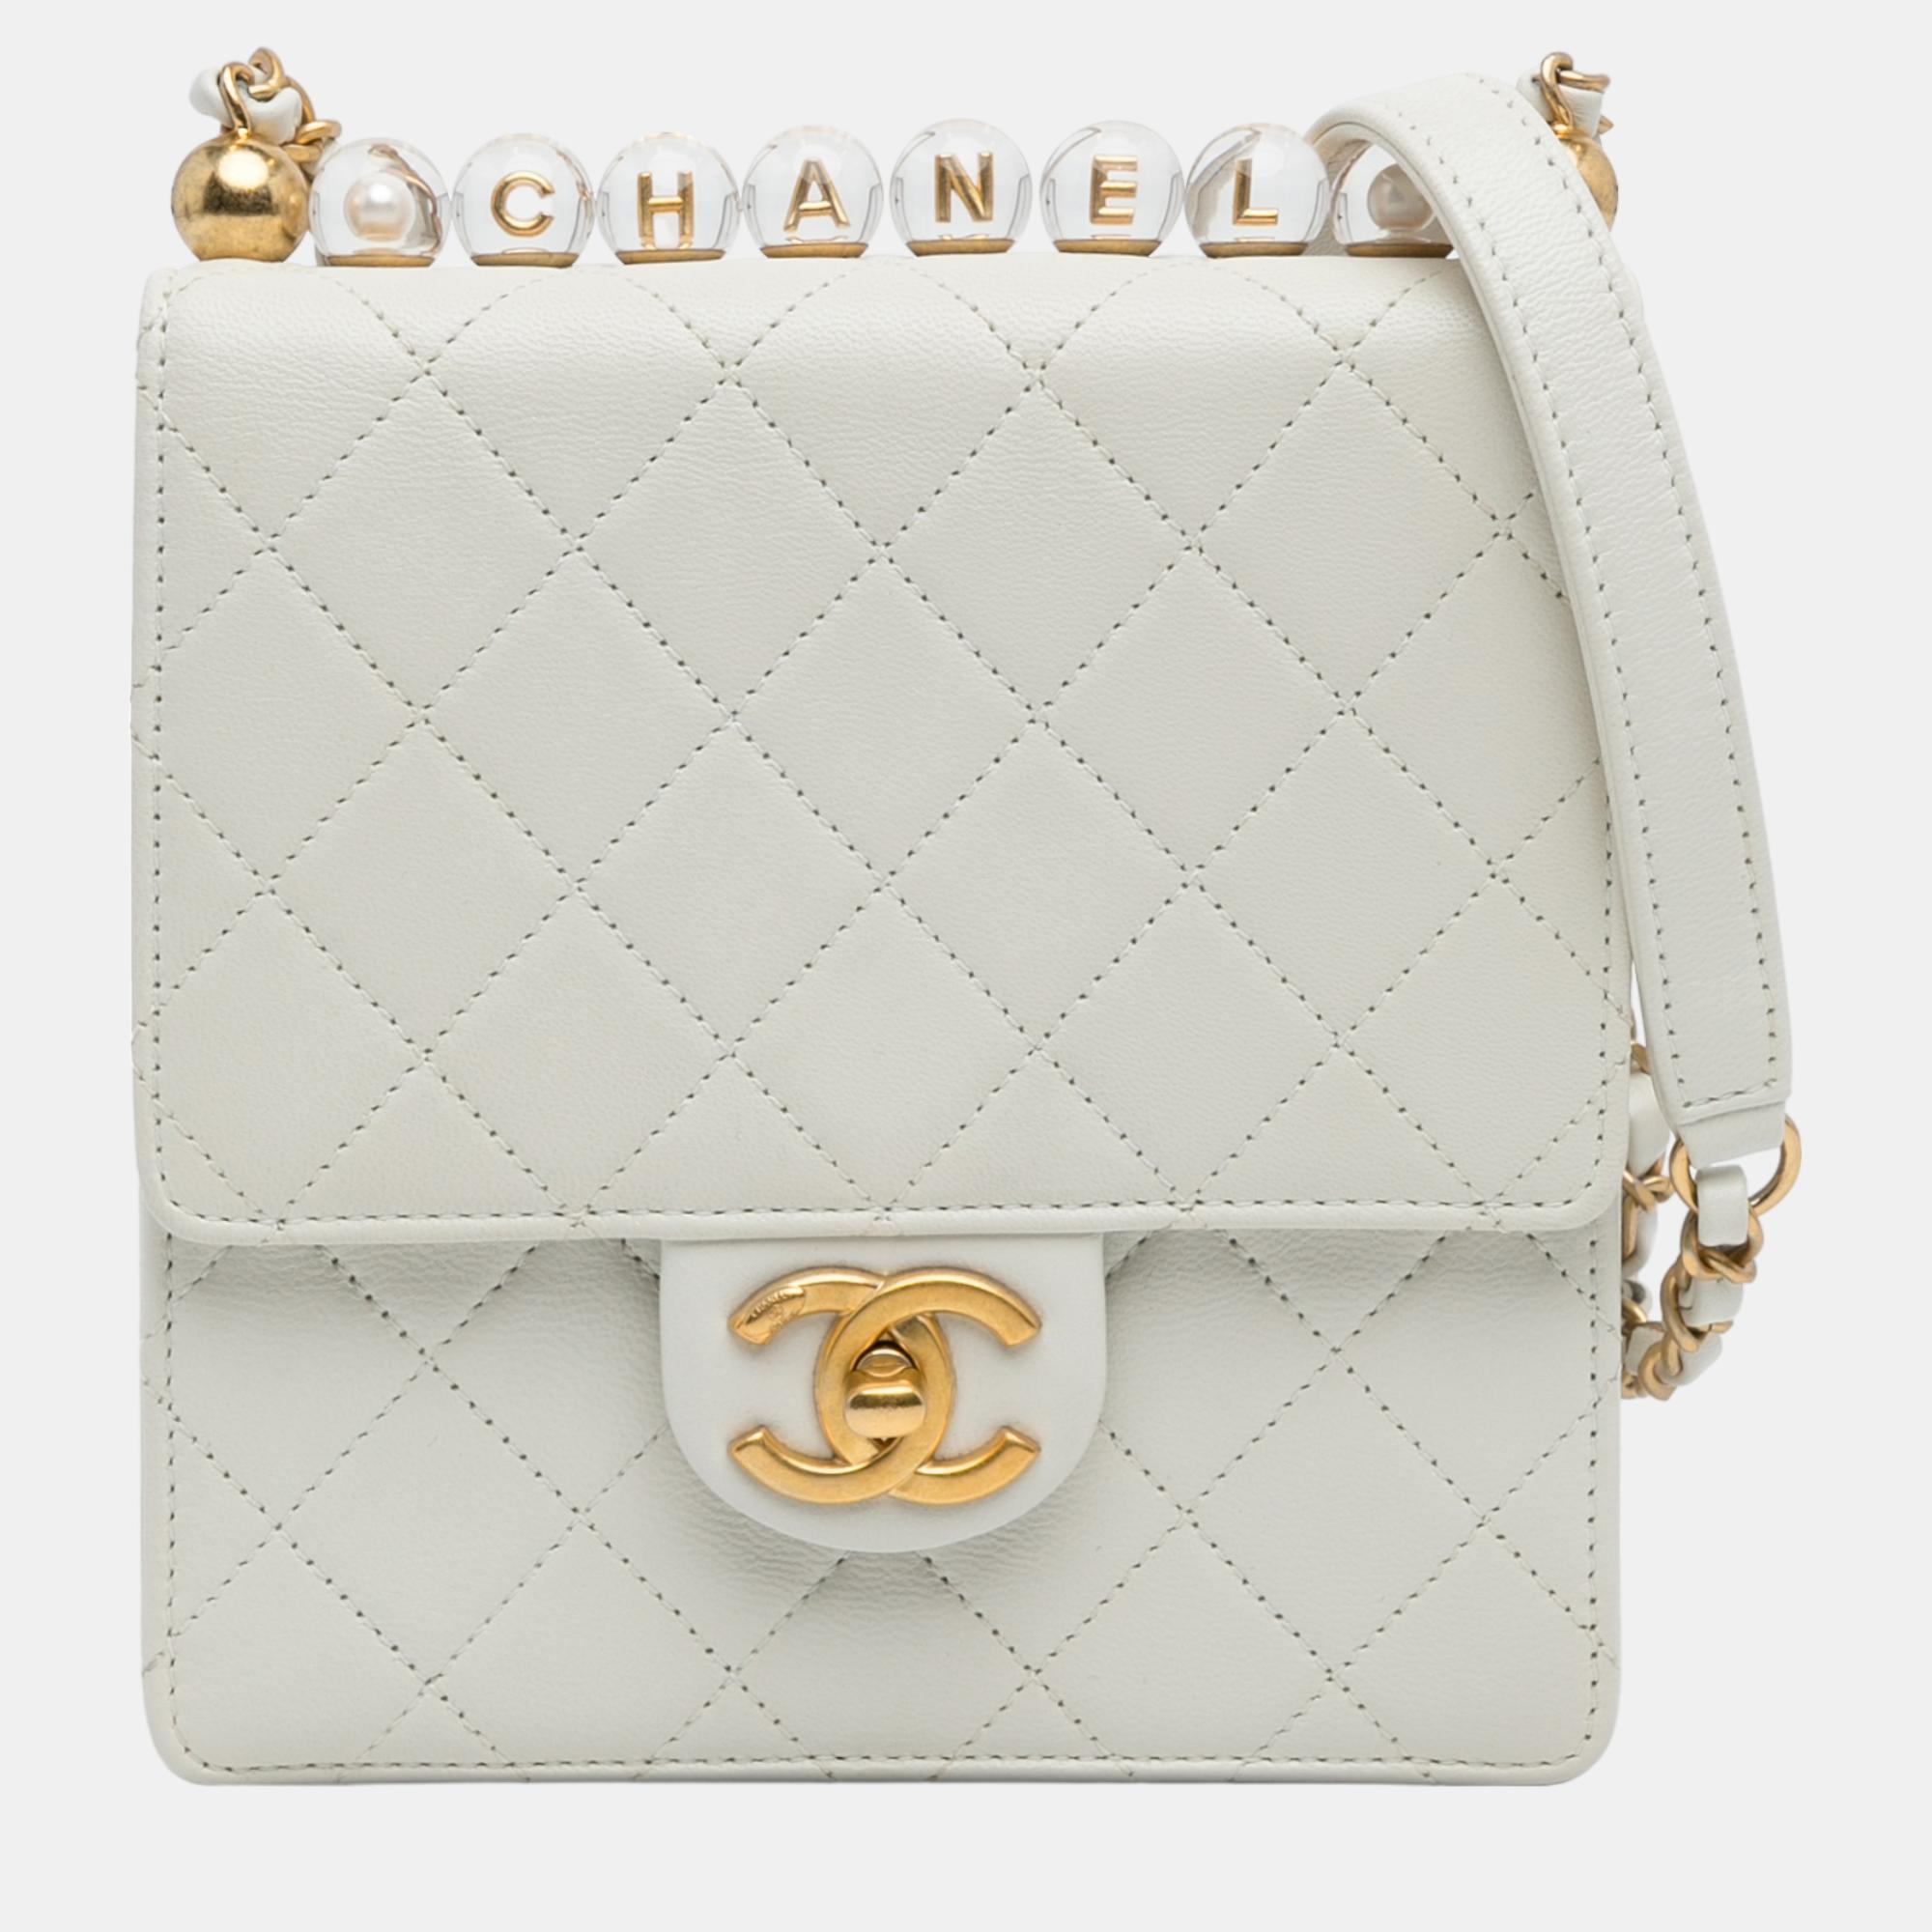 Chanel white small chic pearls flap